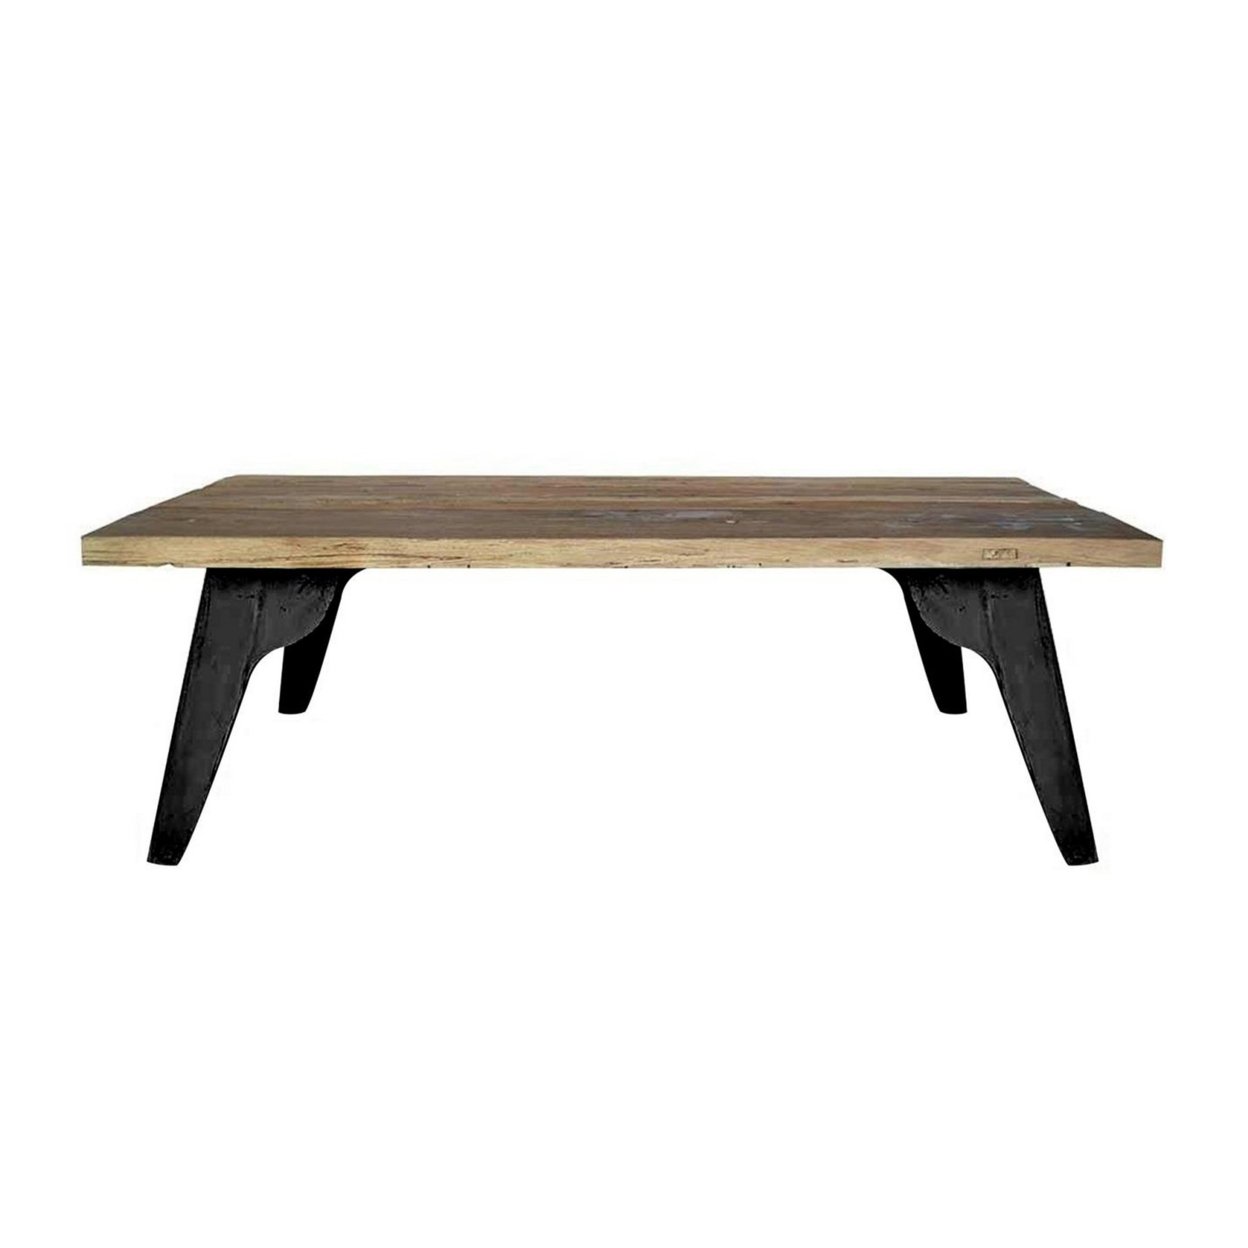 55 Inch Coffee Table, Smooth Wood Surface, Rubbed Edges, Flared Black Legs- Saltoro Sherpi